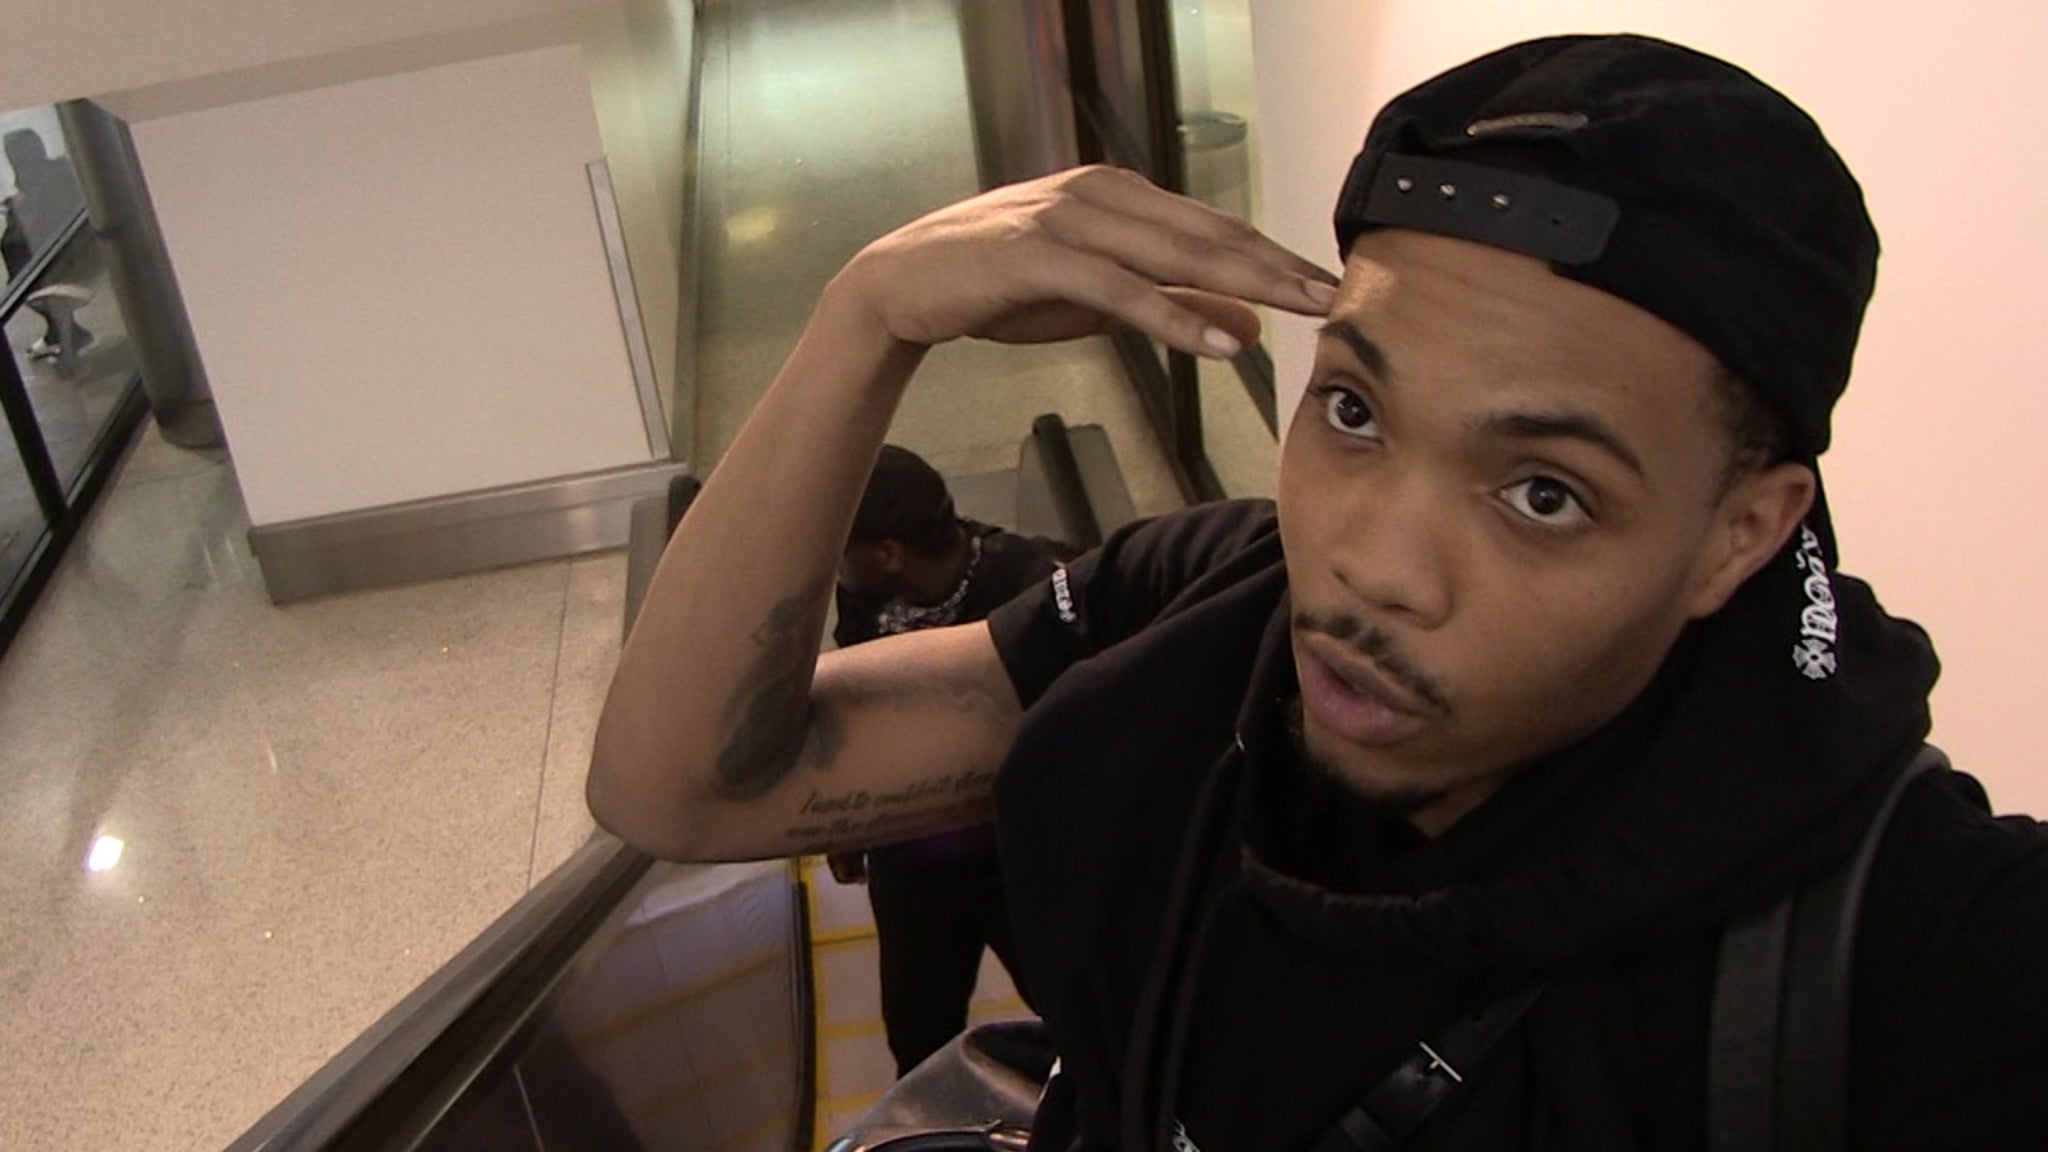 G Herbo Says Cops Want To Kill Black People, Kids Should Be Careful